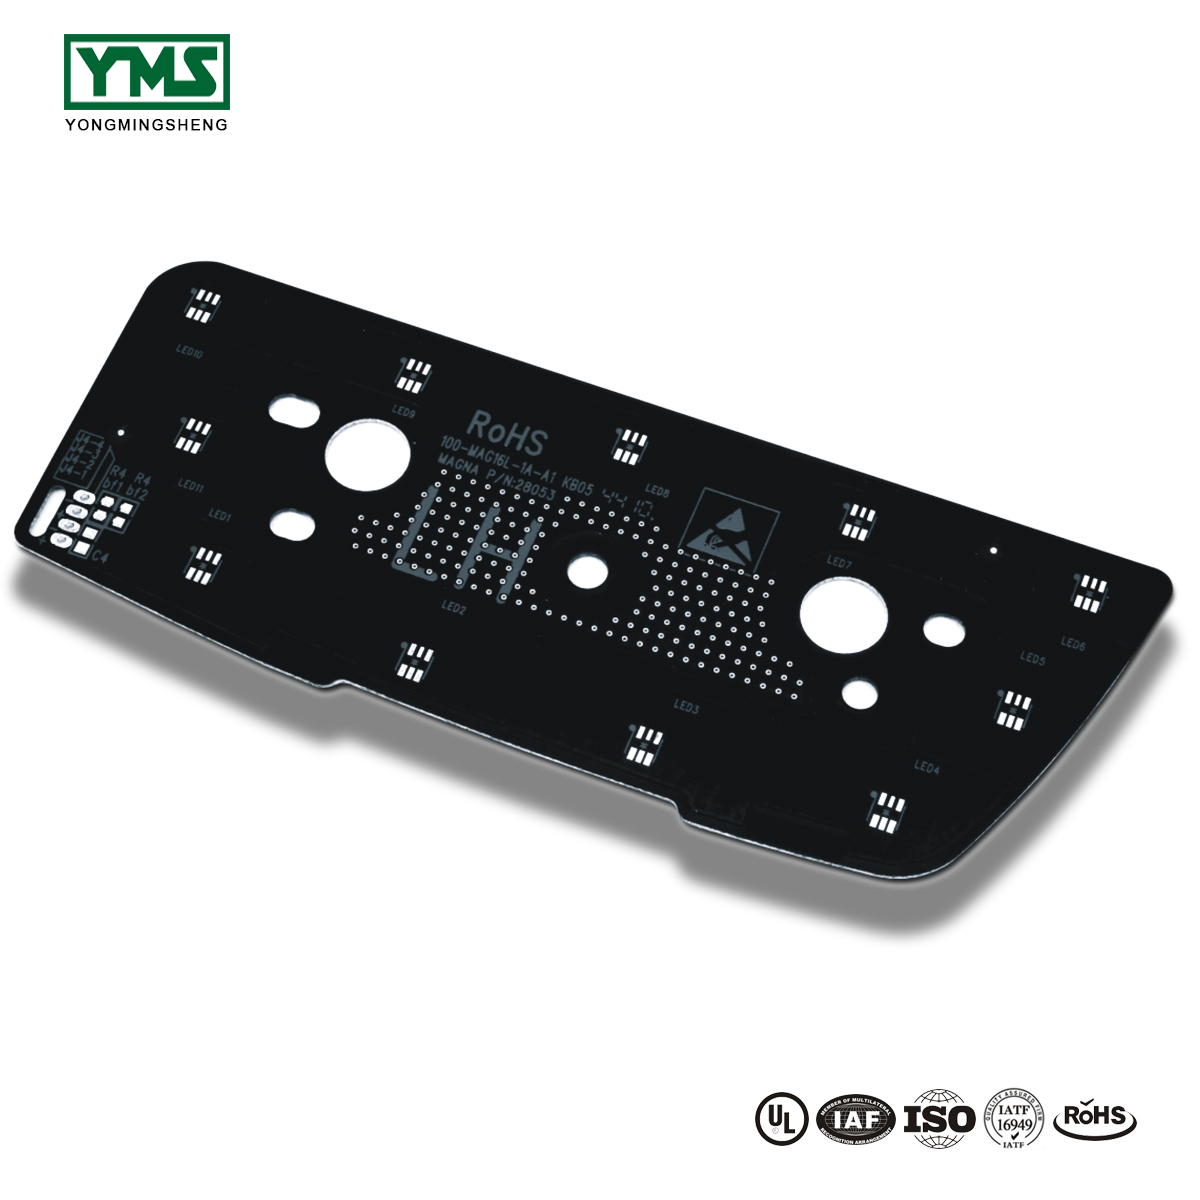 Super Lowest Price Double Layer Fpc - 4 Layer (4/4/4/4OZ) Heavy Copper Black Soldermask Board | YMS PCB – Yongmingsheng